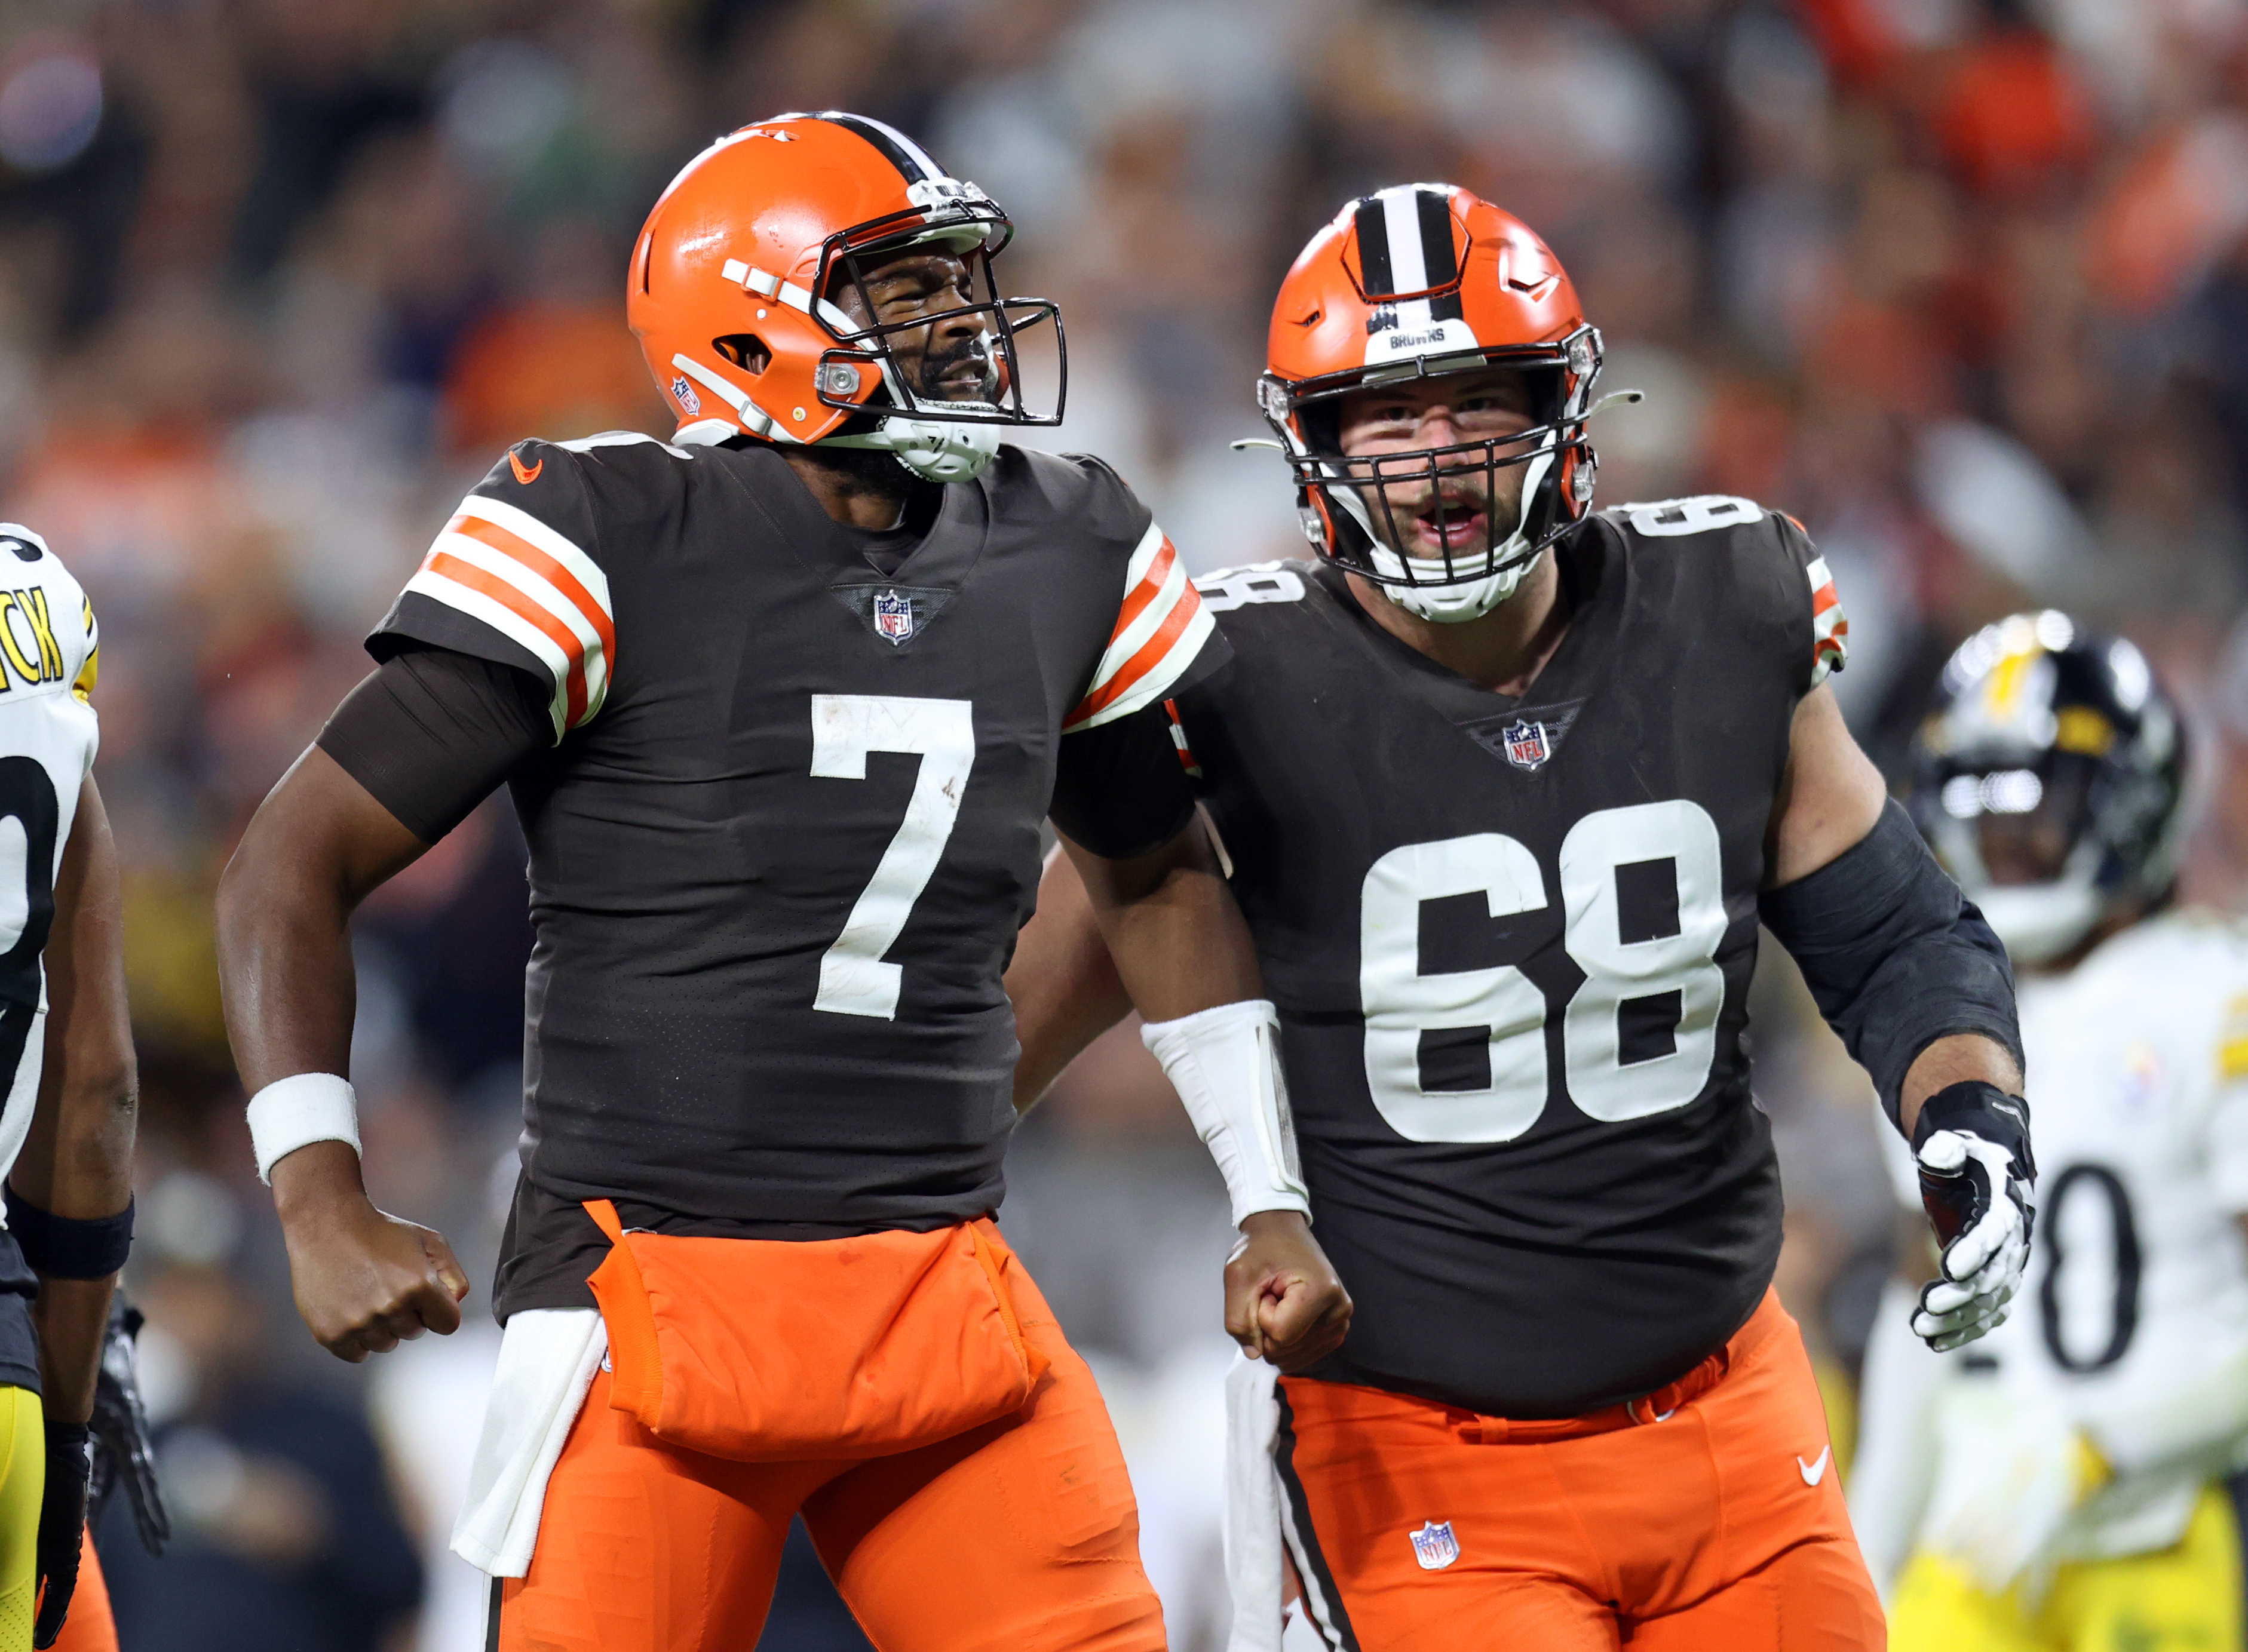 photographers' favorite photos from Browns win over